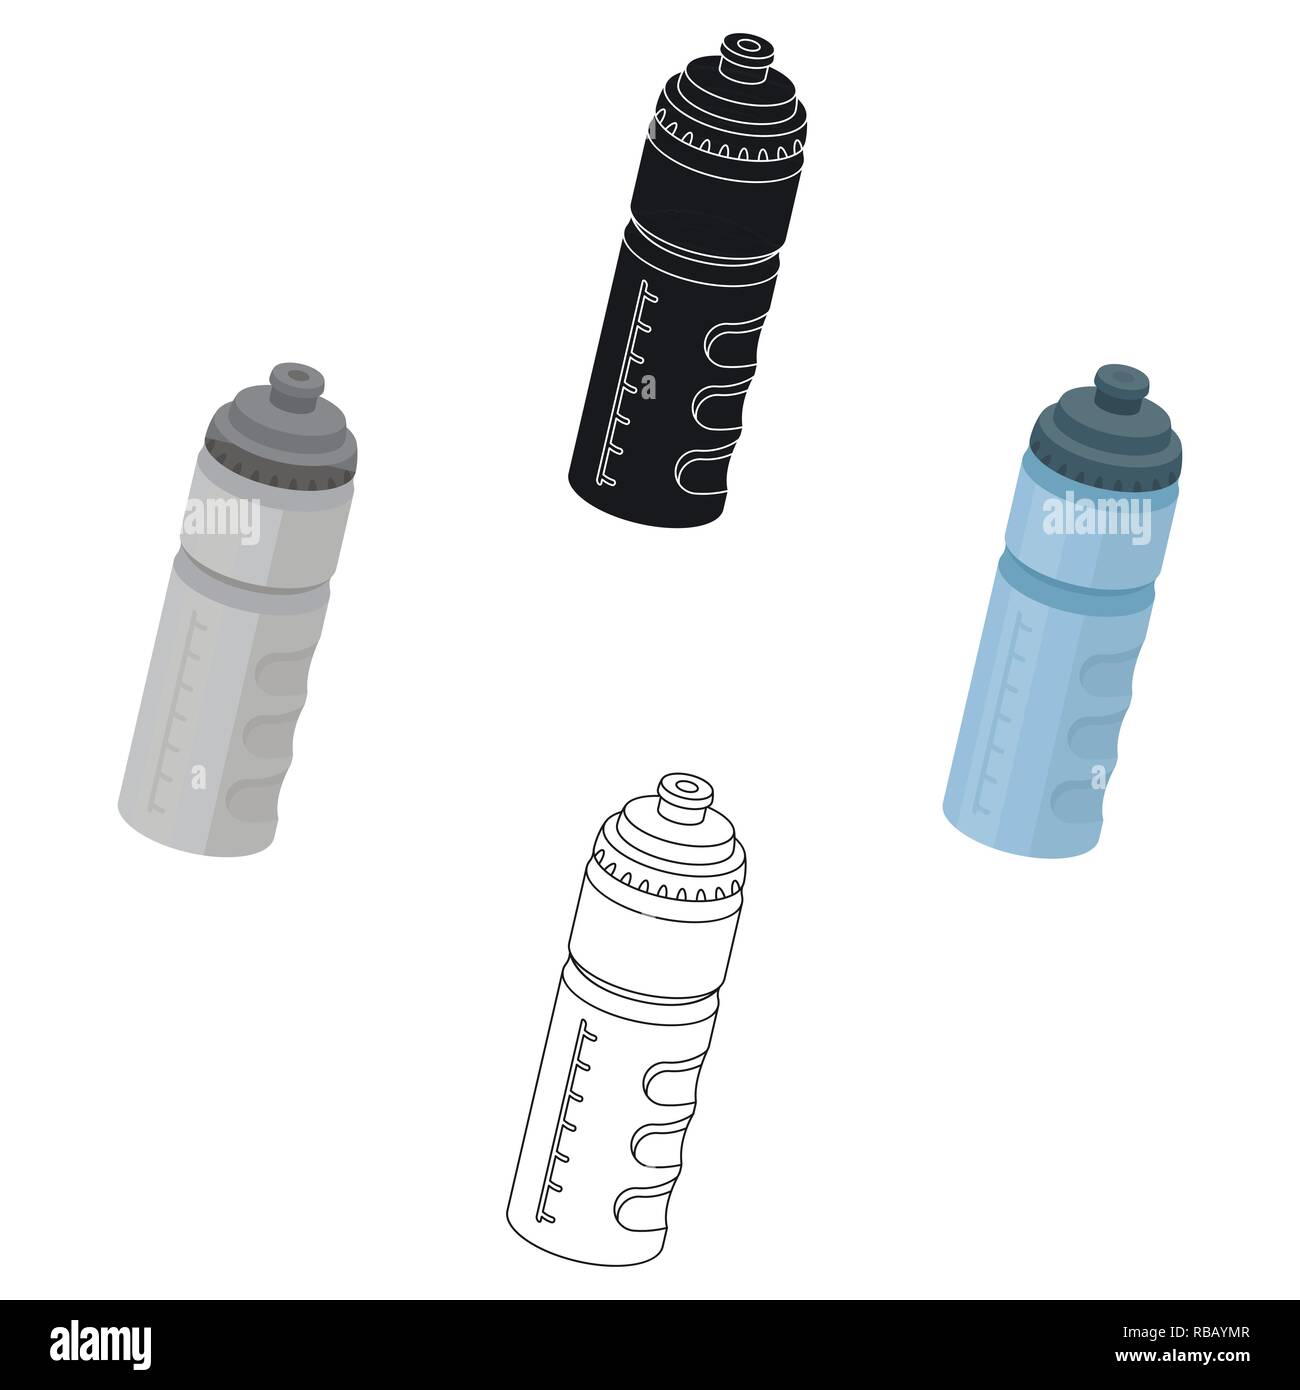 Isolated plastic container for liquid drink Vector Image